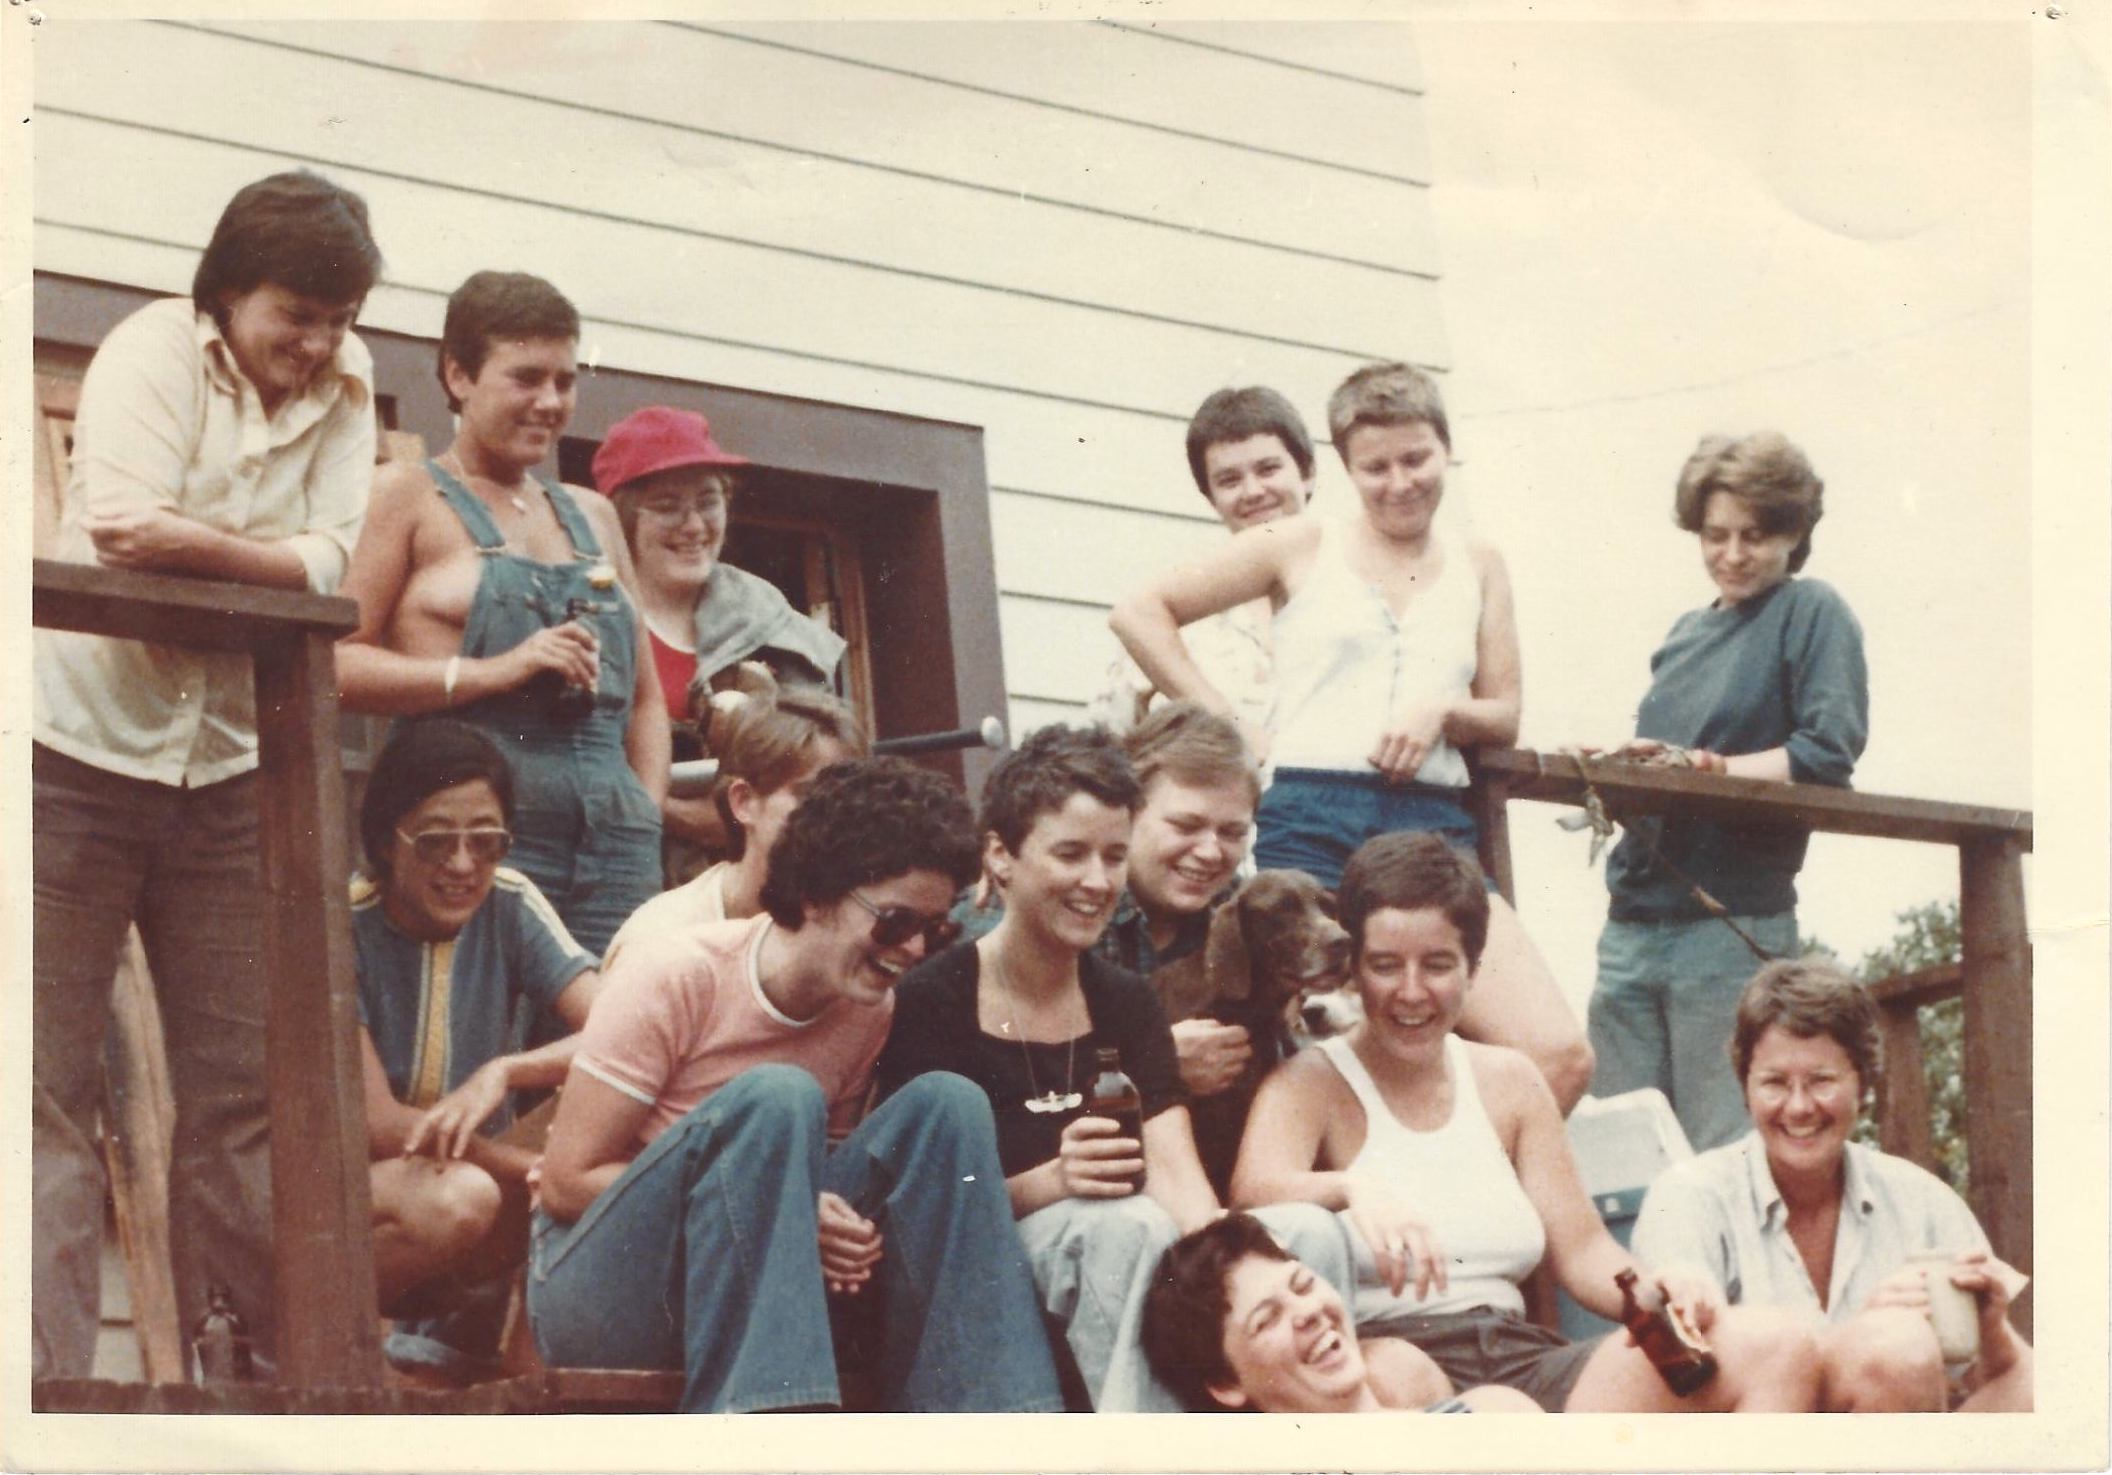 Lamar Van Dyke with friends after a work party at the women's land they owned in Ontario, Canada.